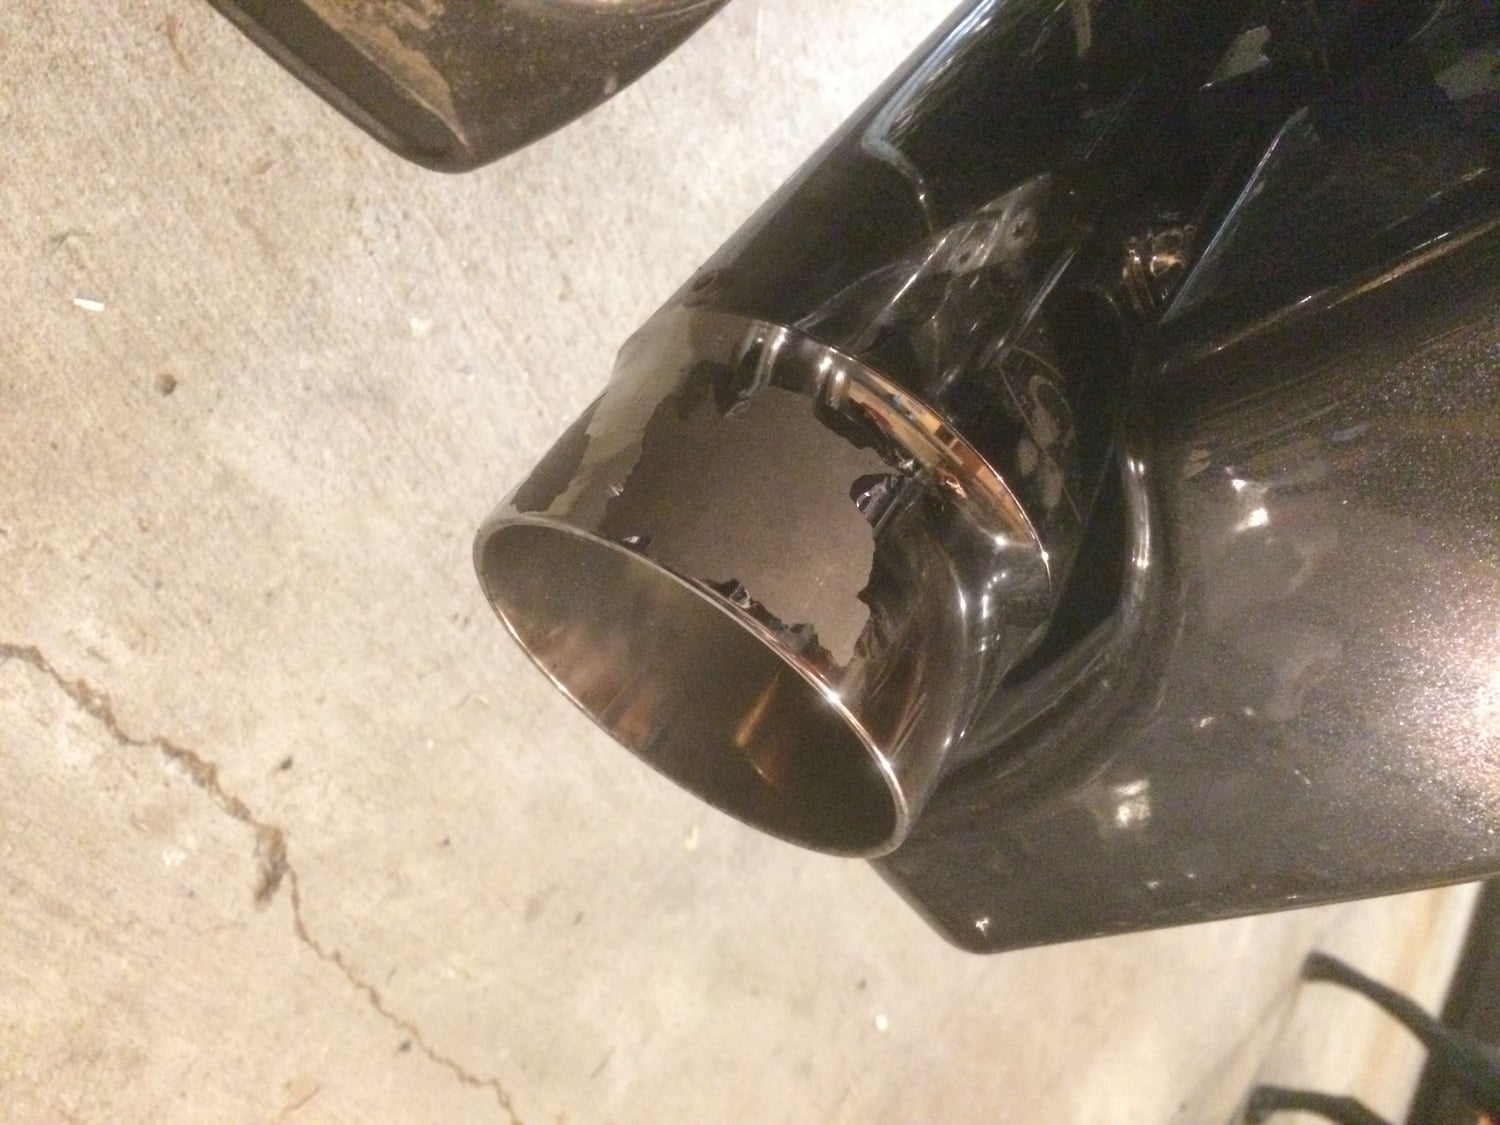 CFR Exhaust rusting and chrome flaking off - Page 9 - Harley Davidson